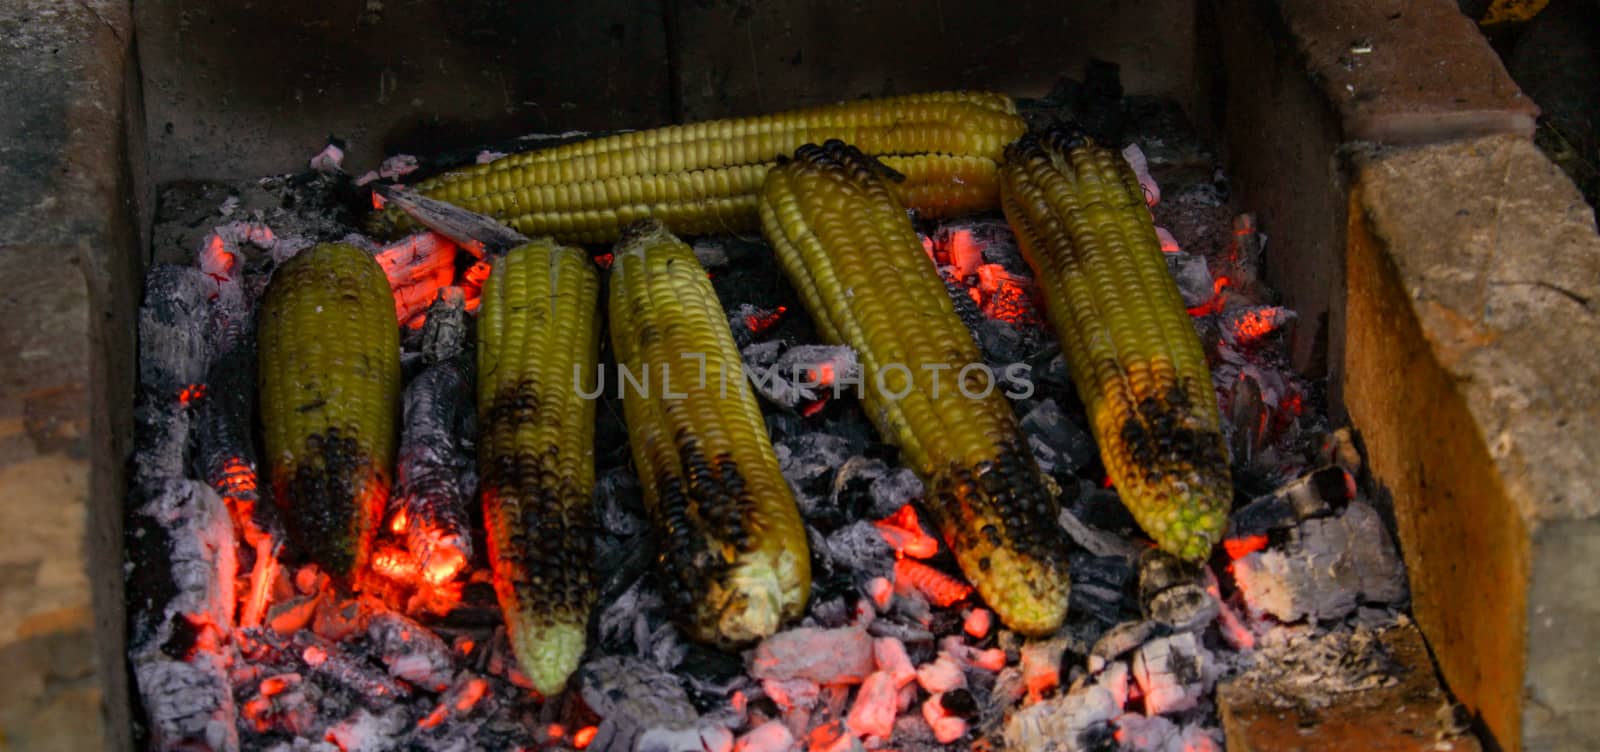 Burnt corn on the cob. Roasting corn on the cob at night on summer days. Summer nights by the fire. by mahirrov